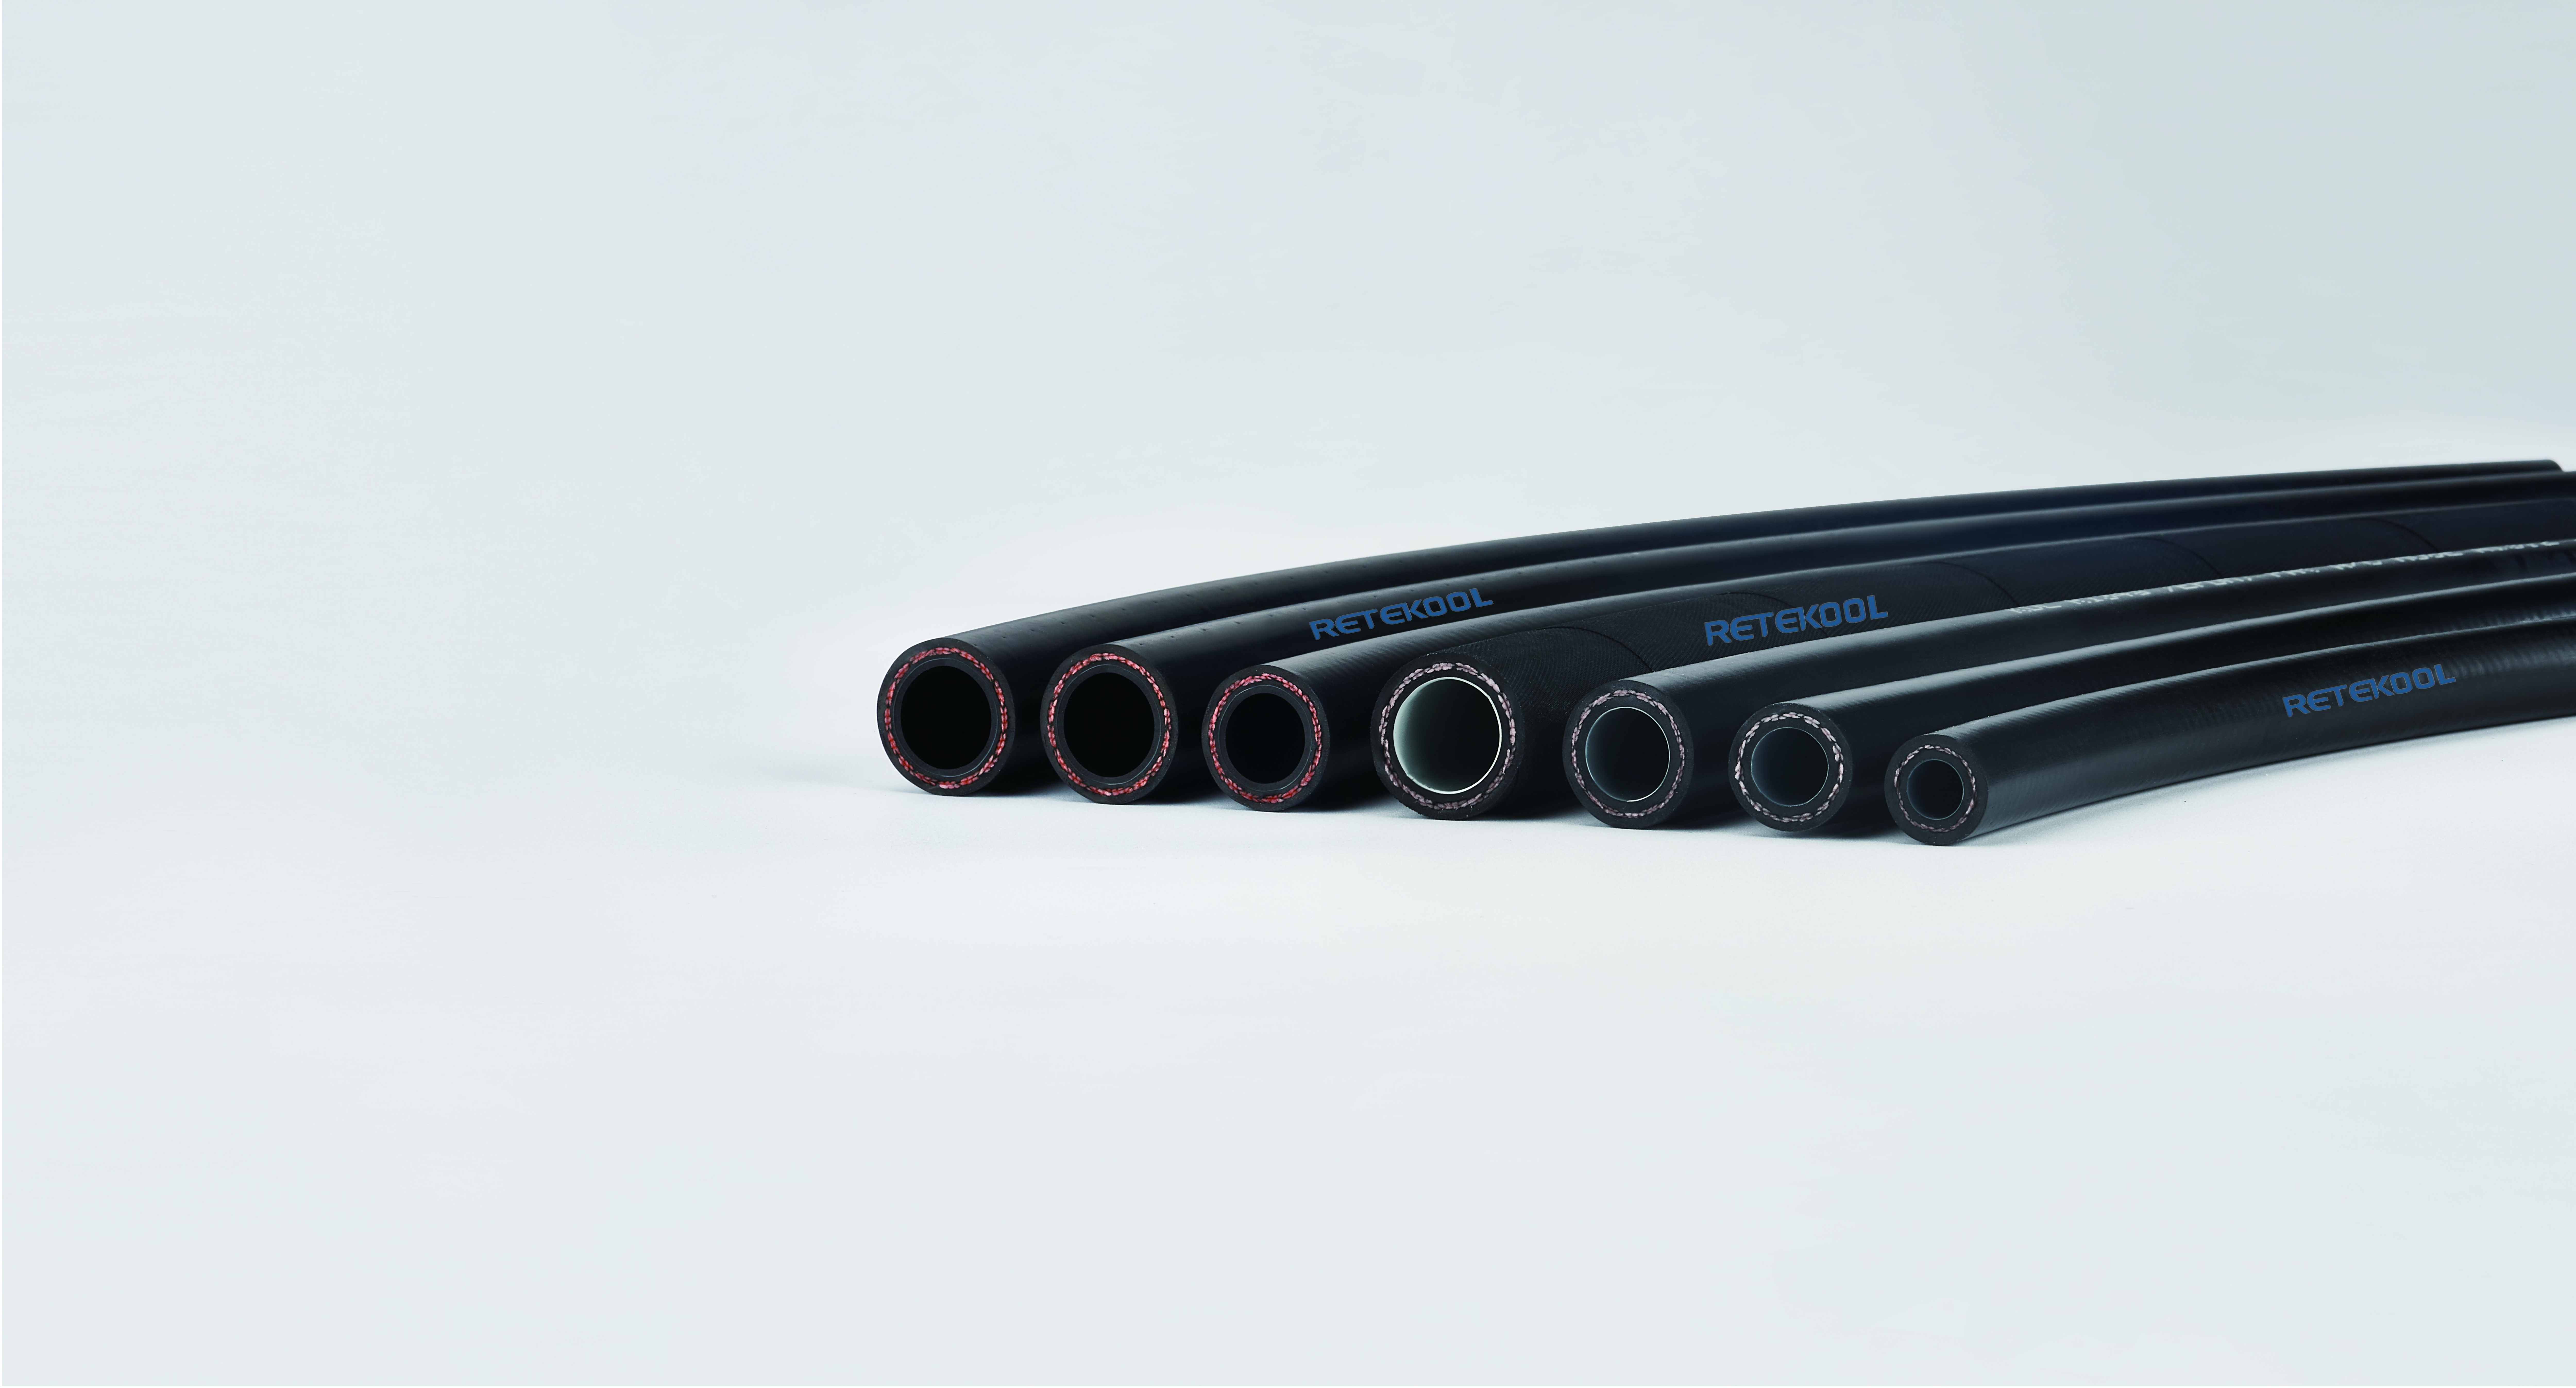 RETEKOOL Brand Auto Air Conditioning Car Hoses Assembly Suppliers